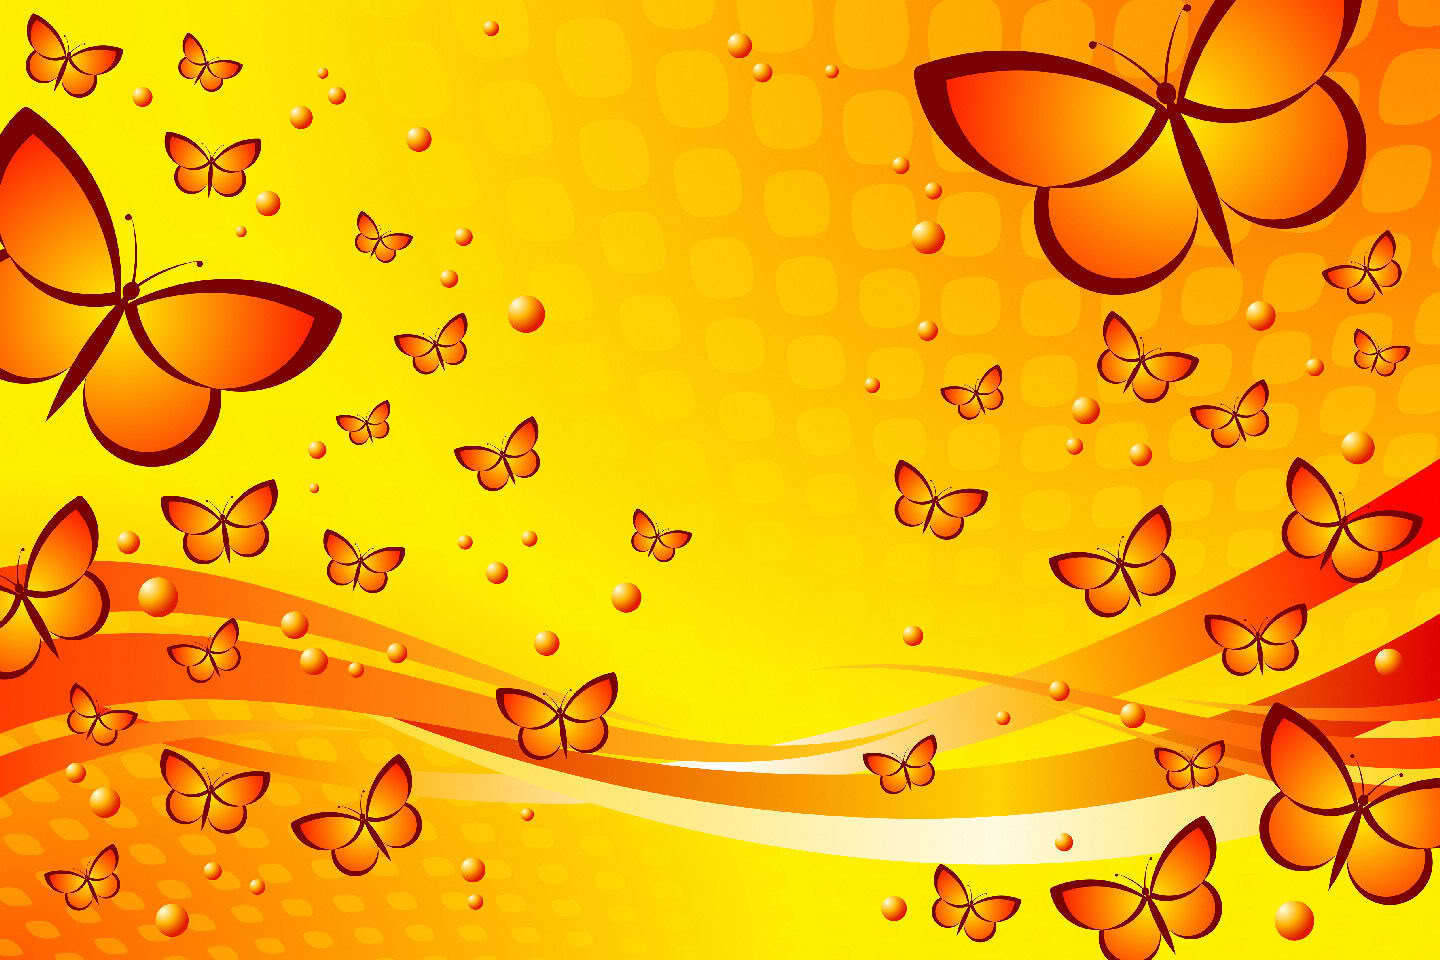 Download From Cute Butterfly Wallpaper Full Hd Wallpapers - Yellow Butterfly  Background Designs - 1440x960 Wallpaper 